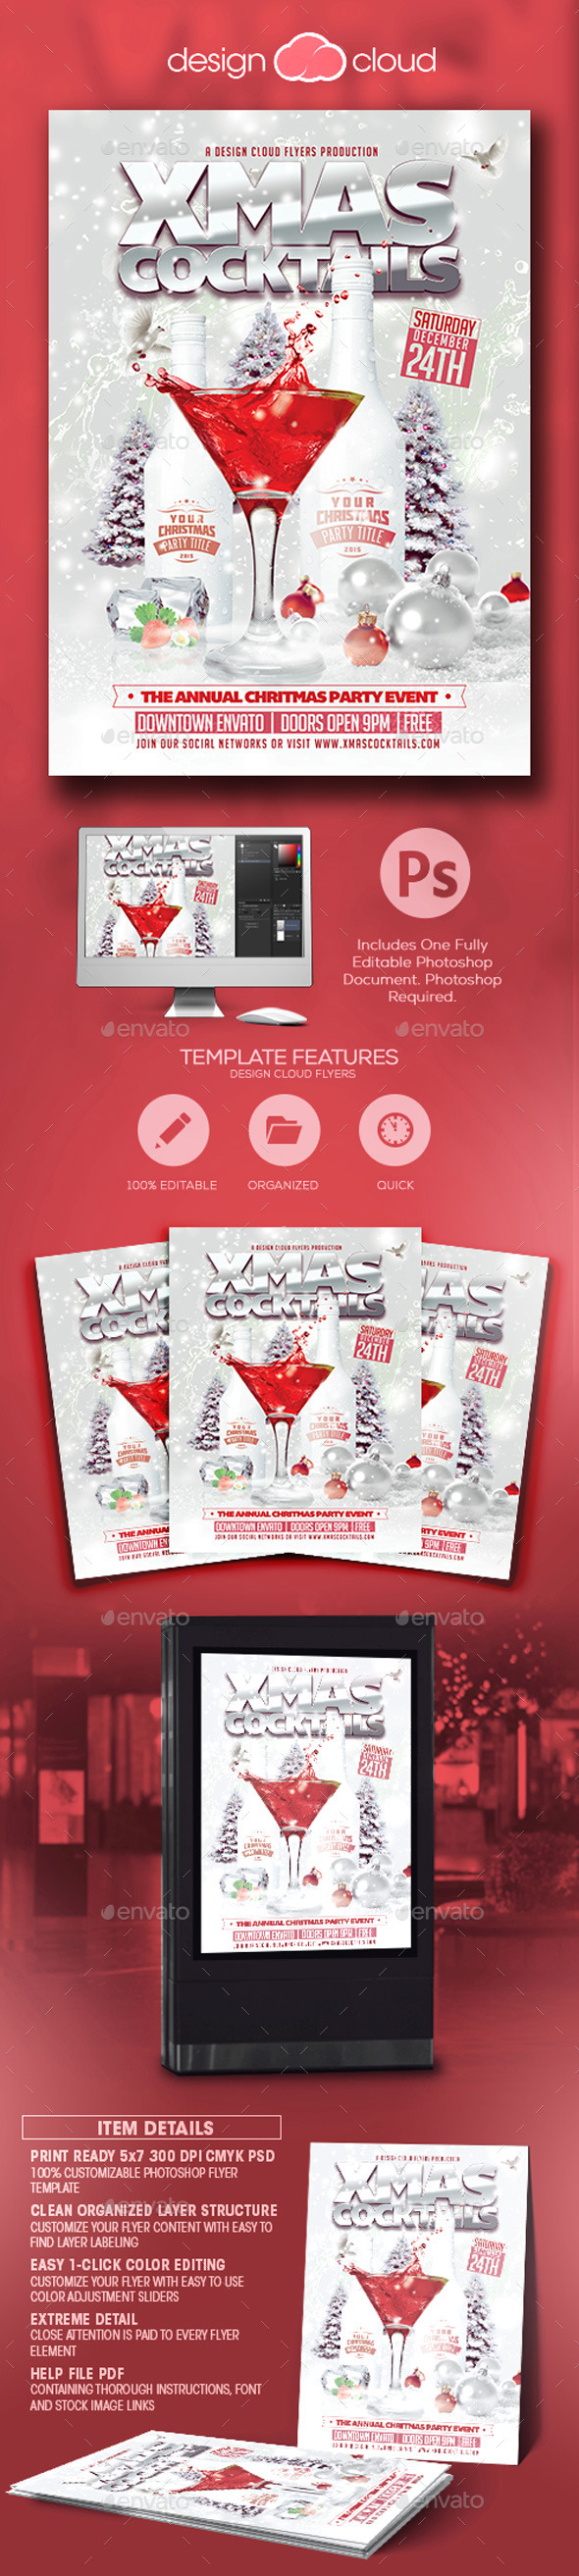 White Christmas Cocktail Party Flyer Template